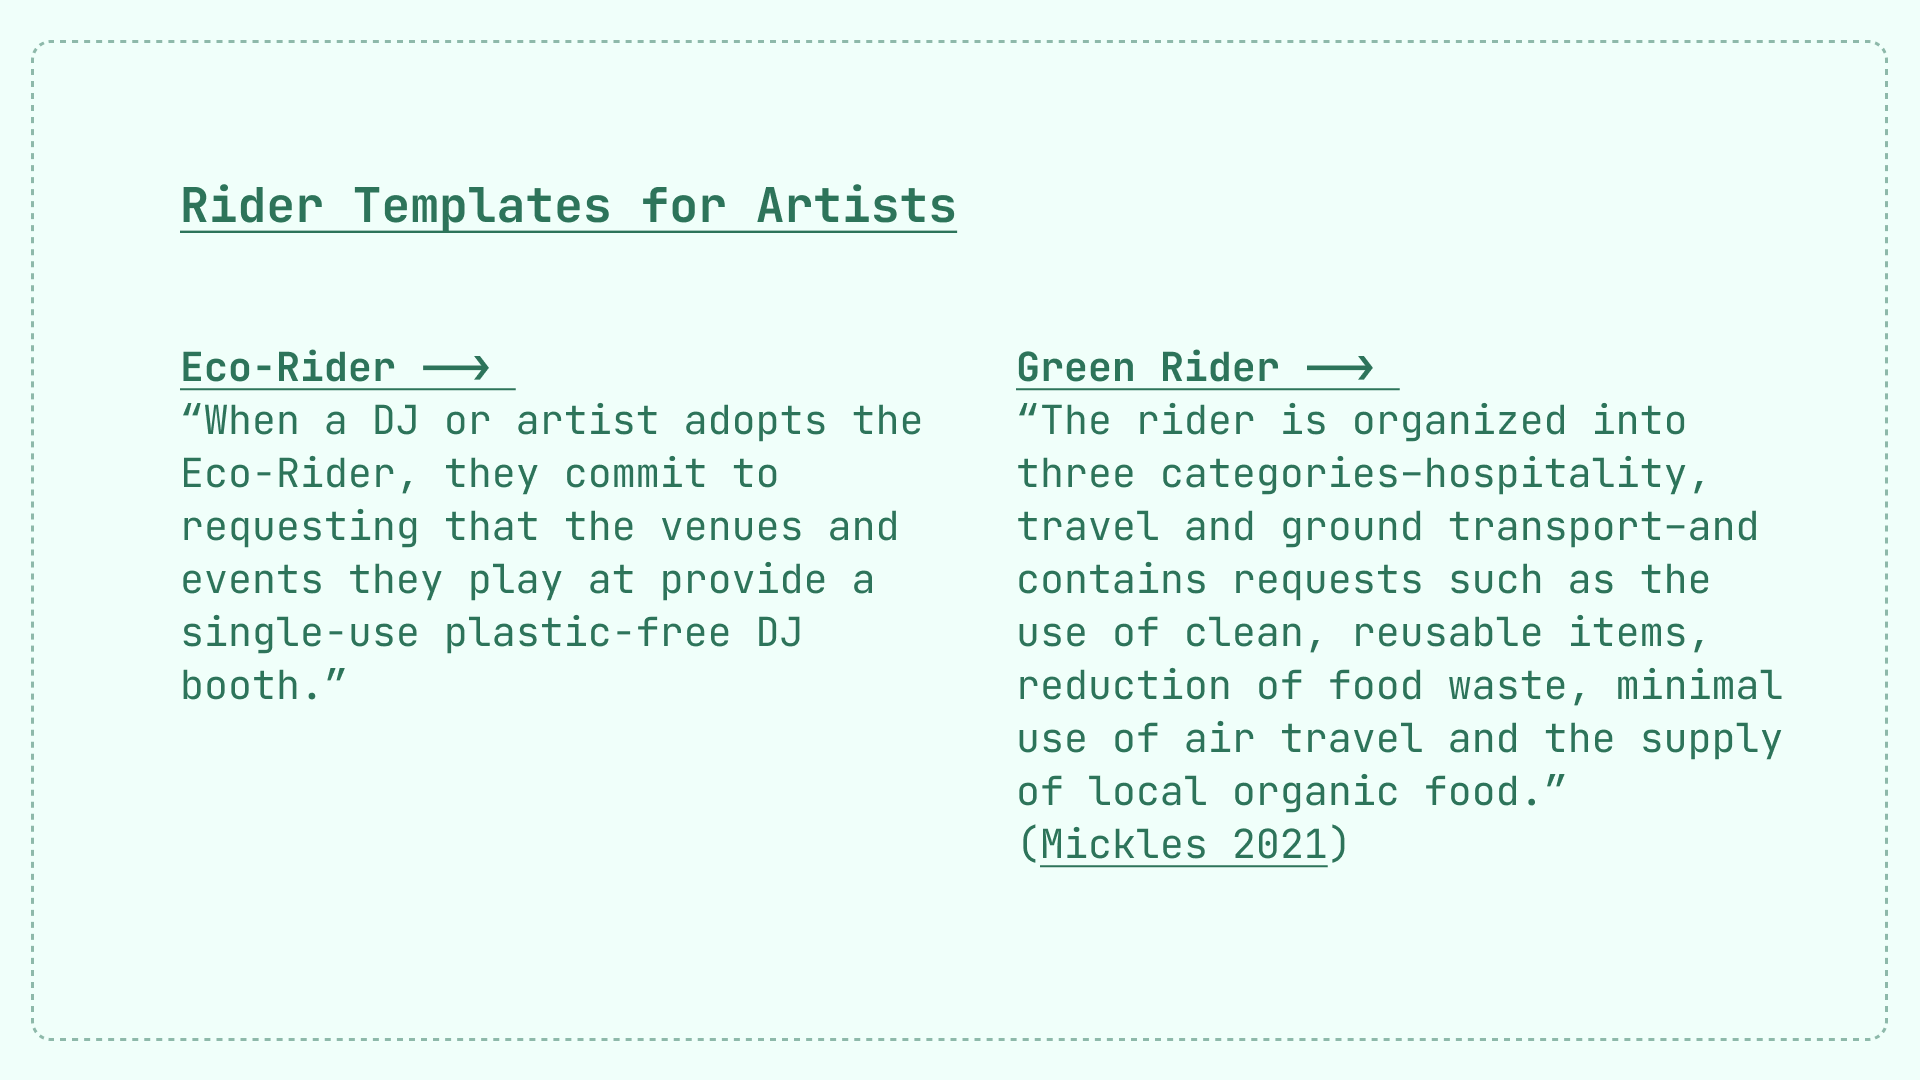 A slide about rider templates for artists trying to tour more sustainably.